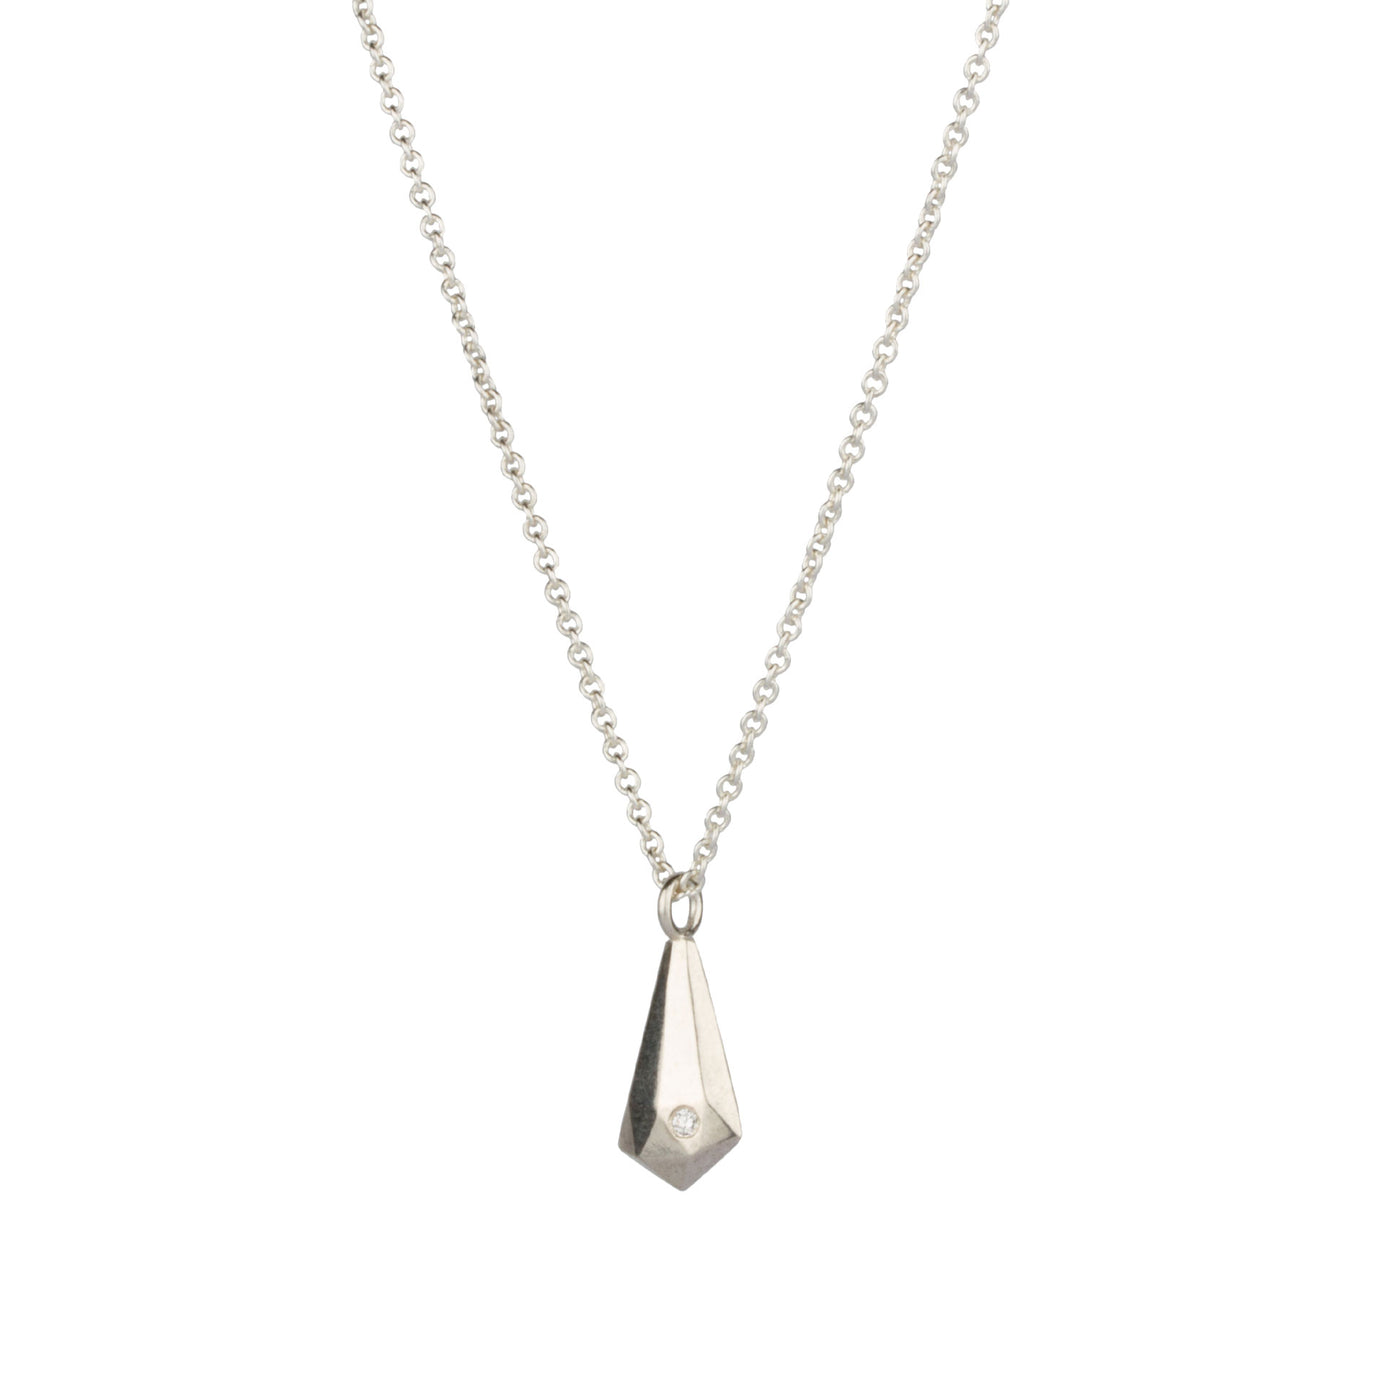 Side view of sterling Silver and Diamond Crystal Fragment Necklace  on a white background